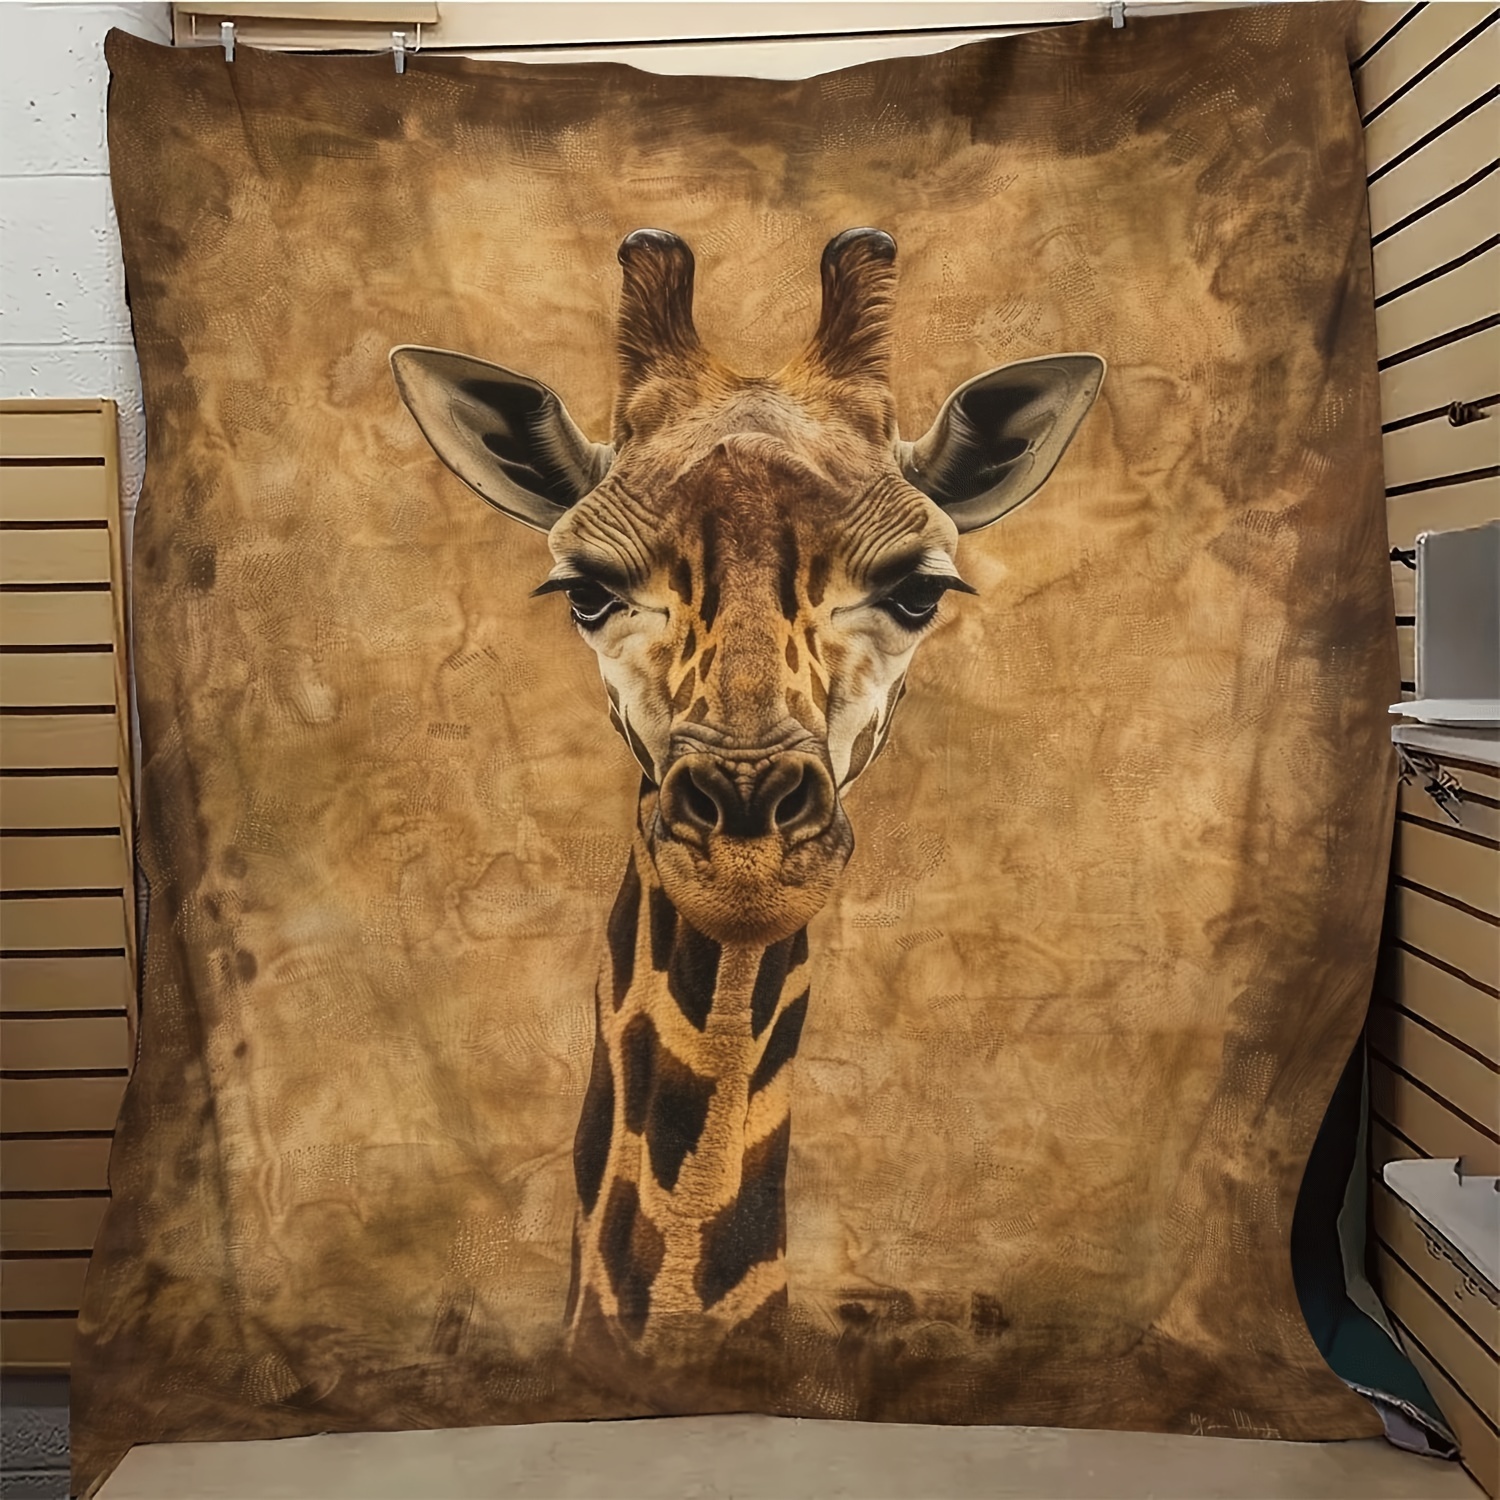 

1pc Mom Gifts Blanket For Daughter Vintage Giraffe Soft Blanket Flannel Blanket For Couch Sofa Office Bed Camping Travel, Multi-purpose Gift Blanket For All Season